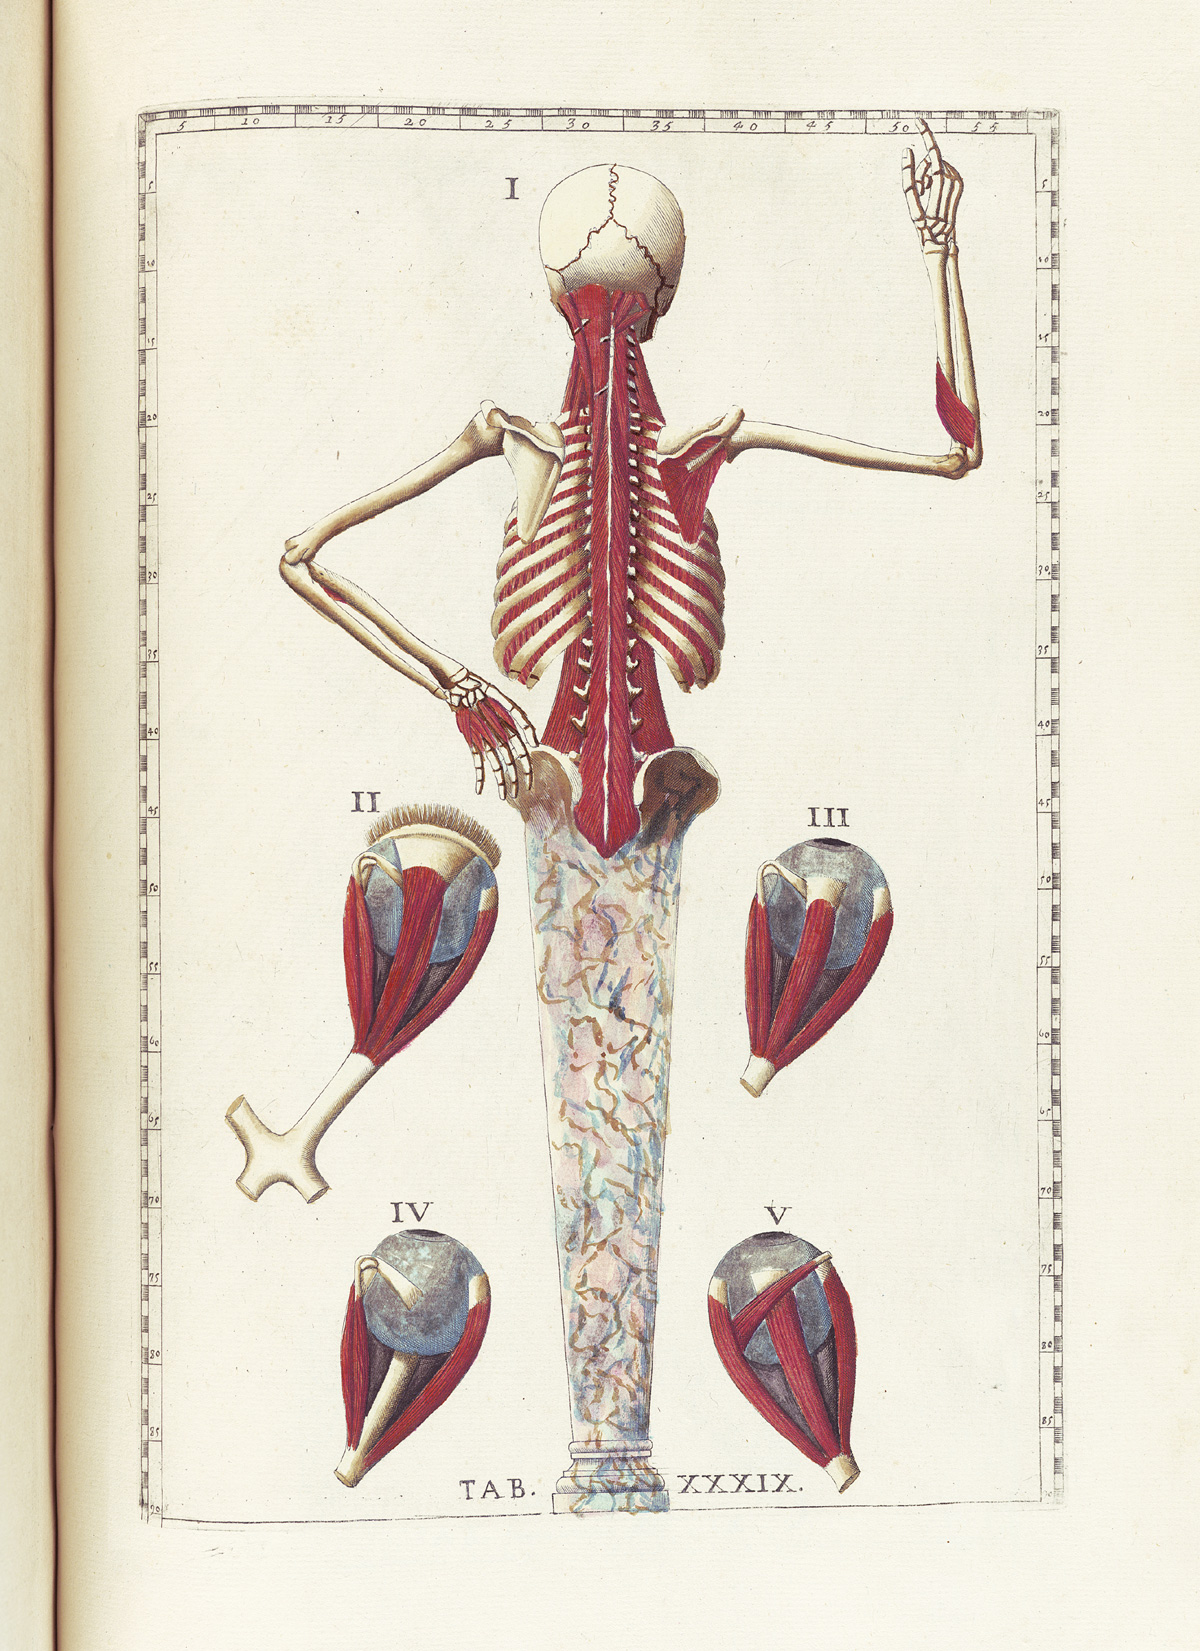 Hand-colored etching of a skeleton figure with back facing the viewer with legs replaced by a classical column with right arm raised and bent at the elbow and left arm bent at the elbow and hand resting on hip; all flesh and exterior muscles are removed to expose the muscles of the back; to the sides in the lower half of the page are four eyeballs viewed from different angles with emphasis on the muscles; from Bartholomeo Eustachi’s Tabulae anatomicae, NLM Call no.: WZ 260 E87t 1783.